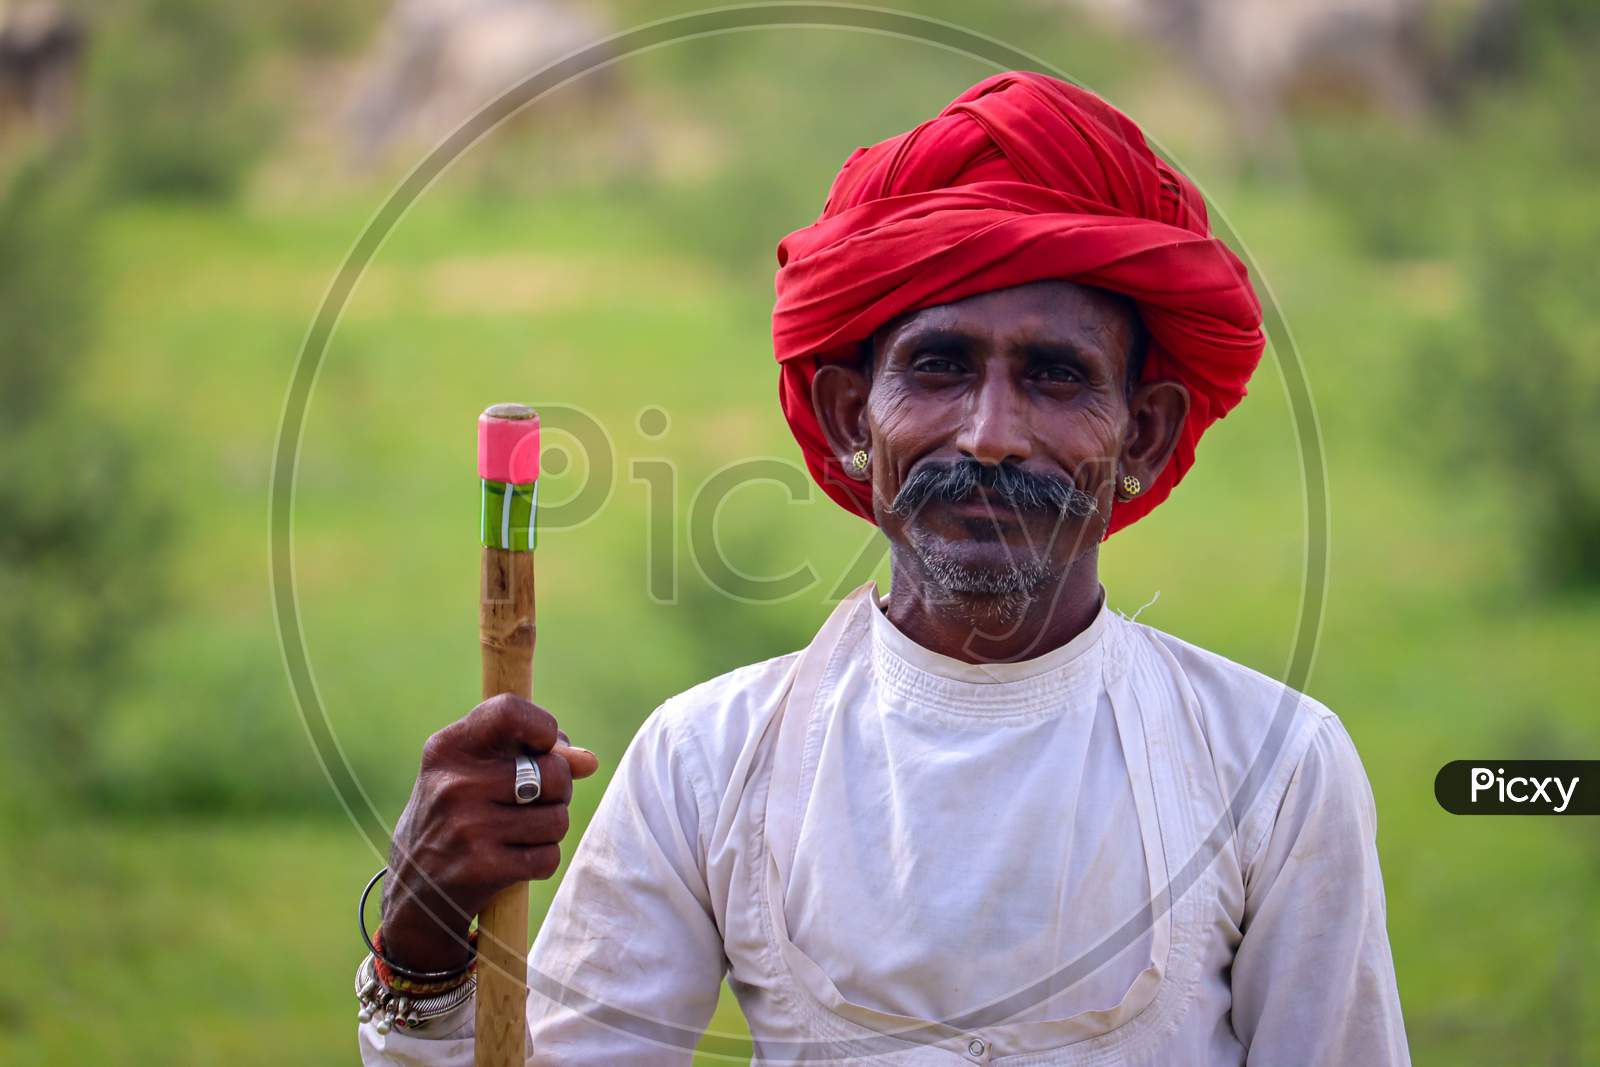 The Indian shepherd with smiling face and traditional dress.